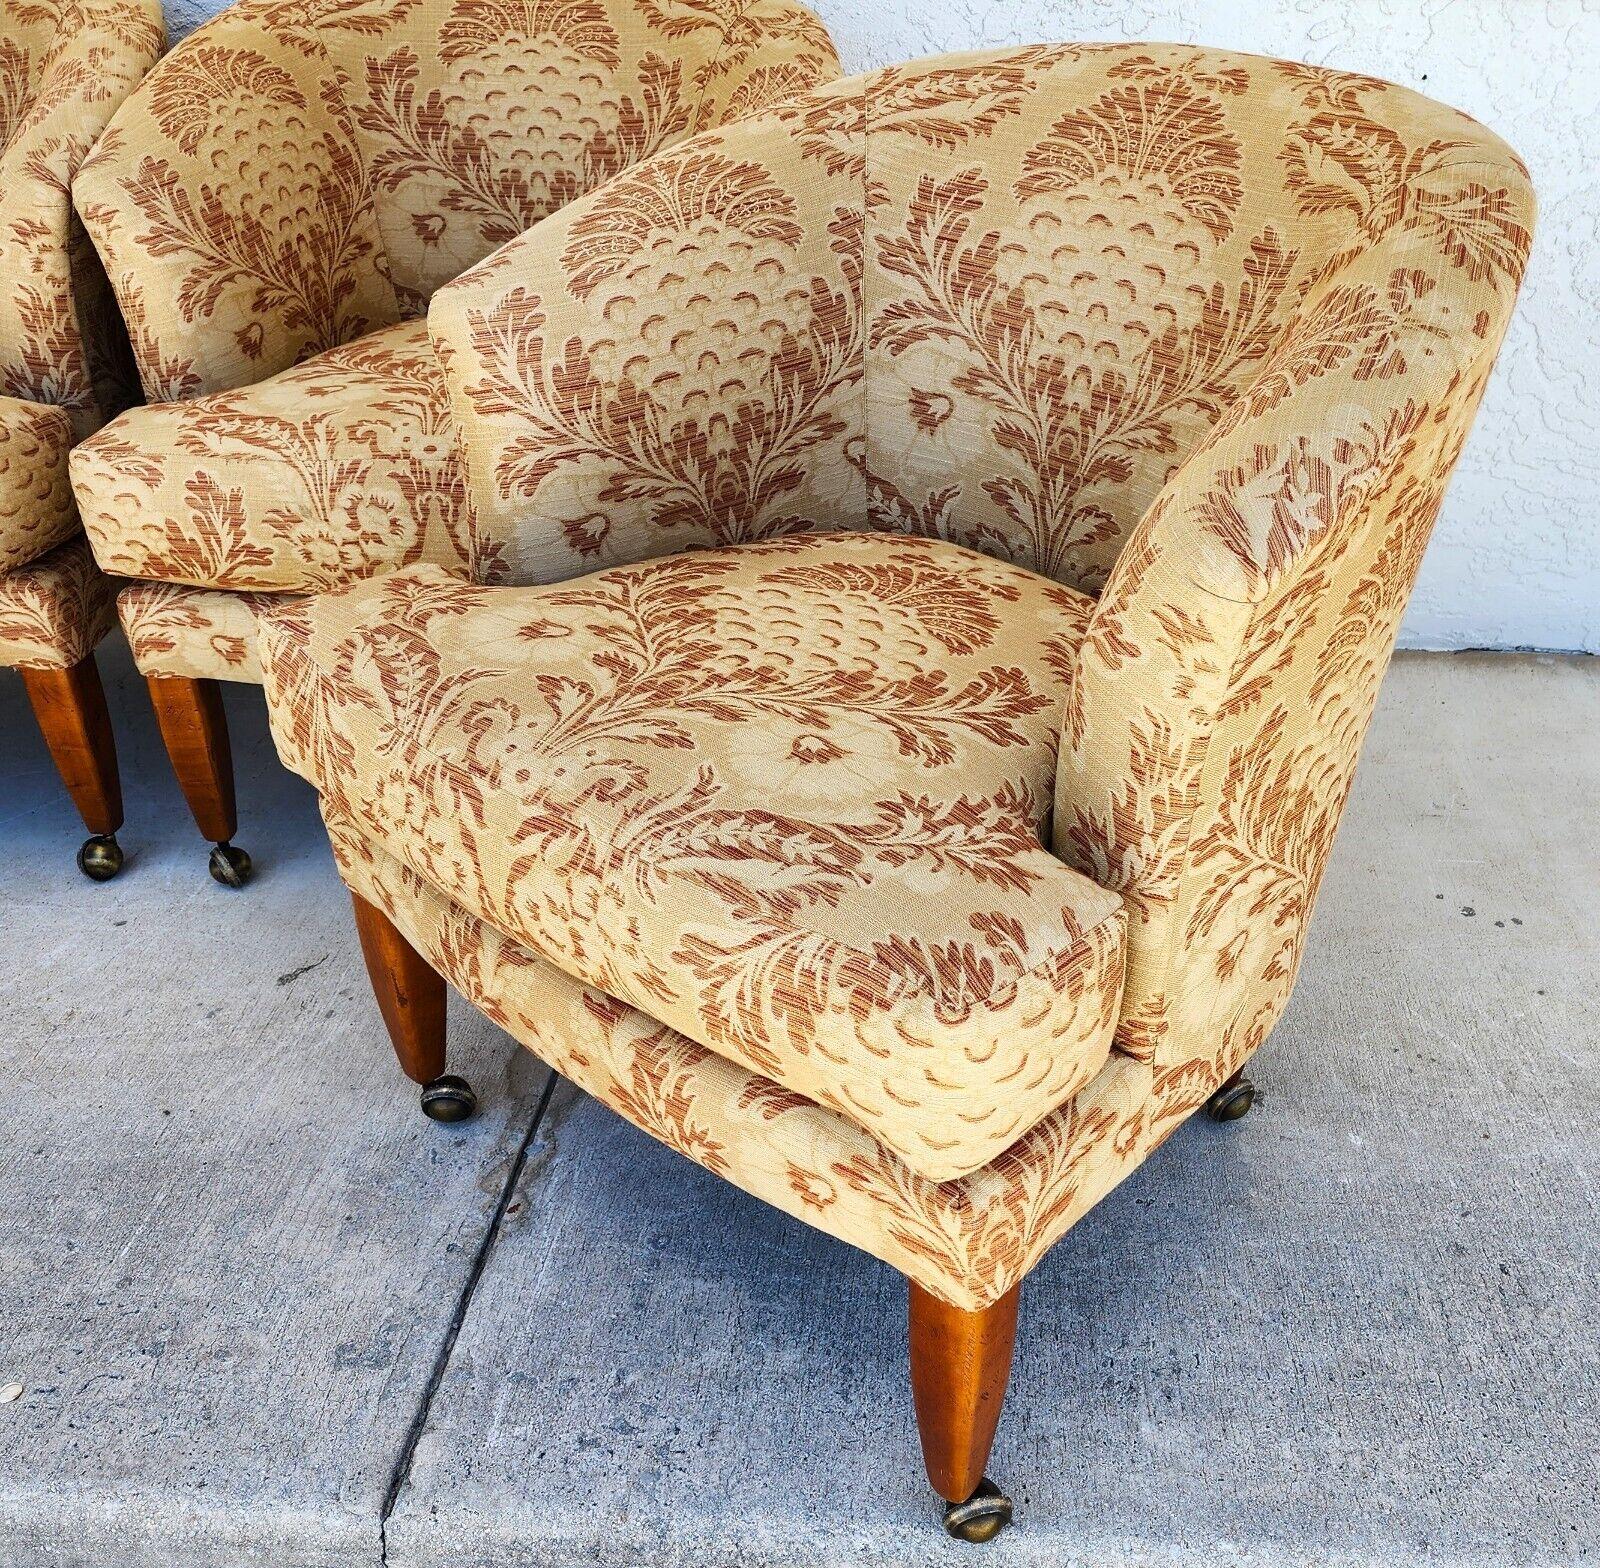 For FULL item description click on CONTINUE READING at the bottom of this page.
Offering One Of Our Recent Palm Beach Estate Fine Furniture Acquisitions Of A 
Set of 4 Very Comfortable Pearson Rolling Dining Game Club Tub Chairs

You can tell by